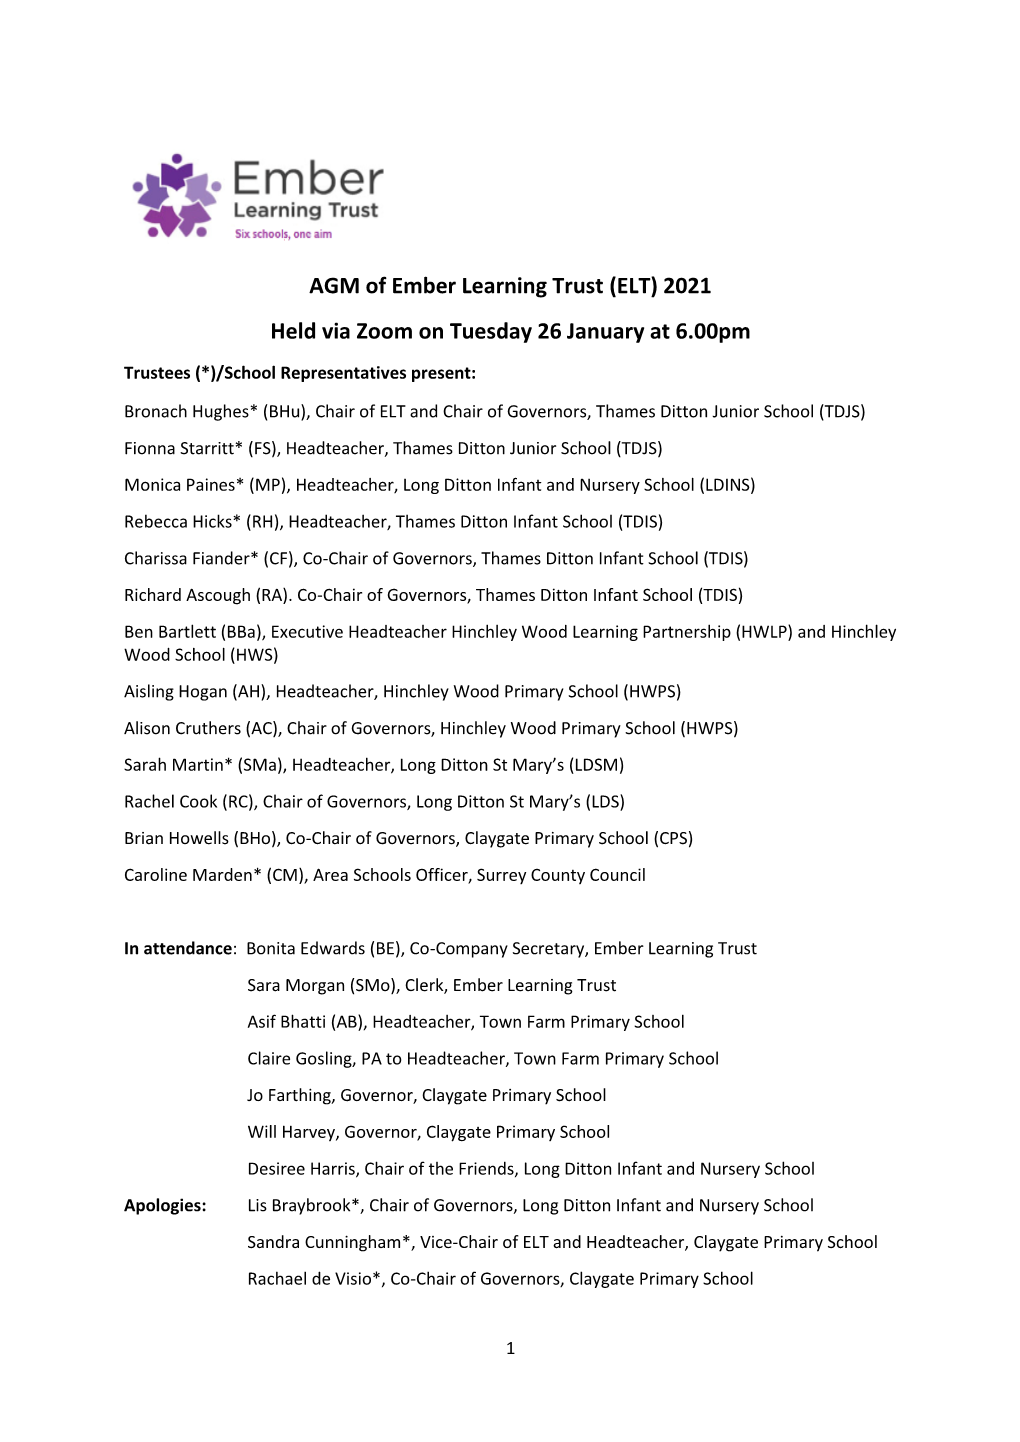 AGM of Ember Learning Trust (ELT) 2021 Held Via Zoom on Tuesday 26 January at 6.00Pm